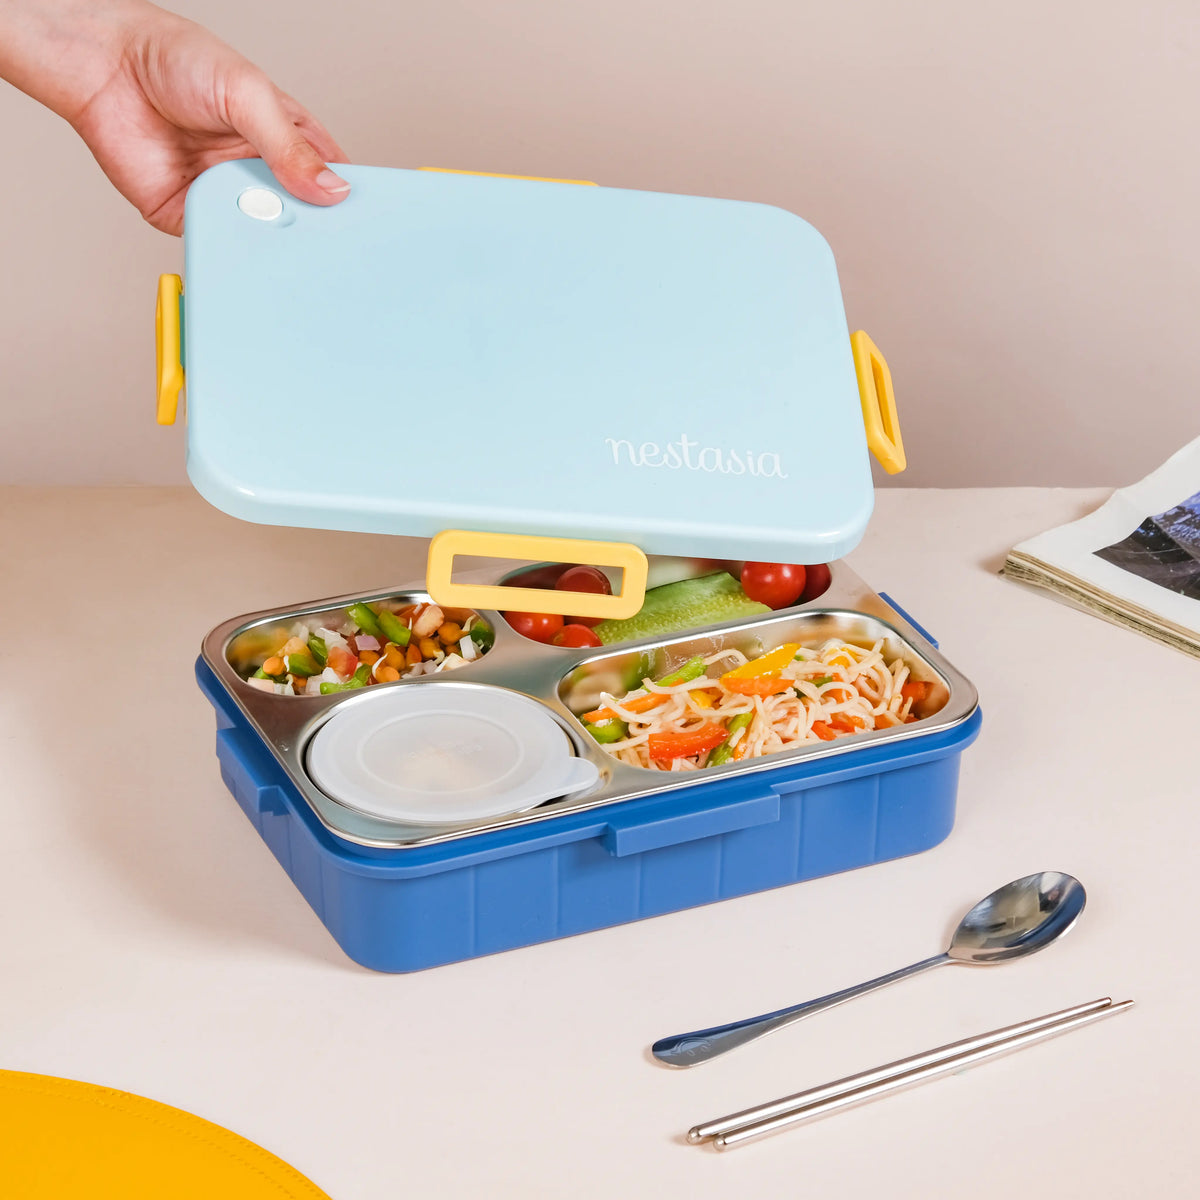 Lunch Box - Buy Insulated Lunch Box Online At Best Prices | Nestasia